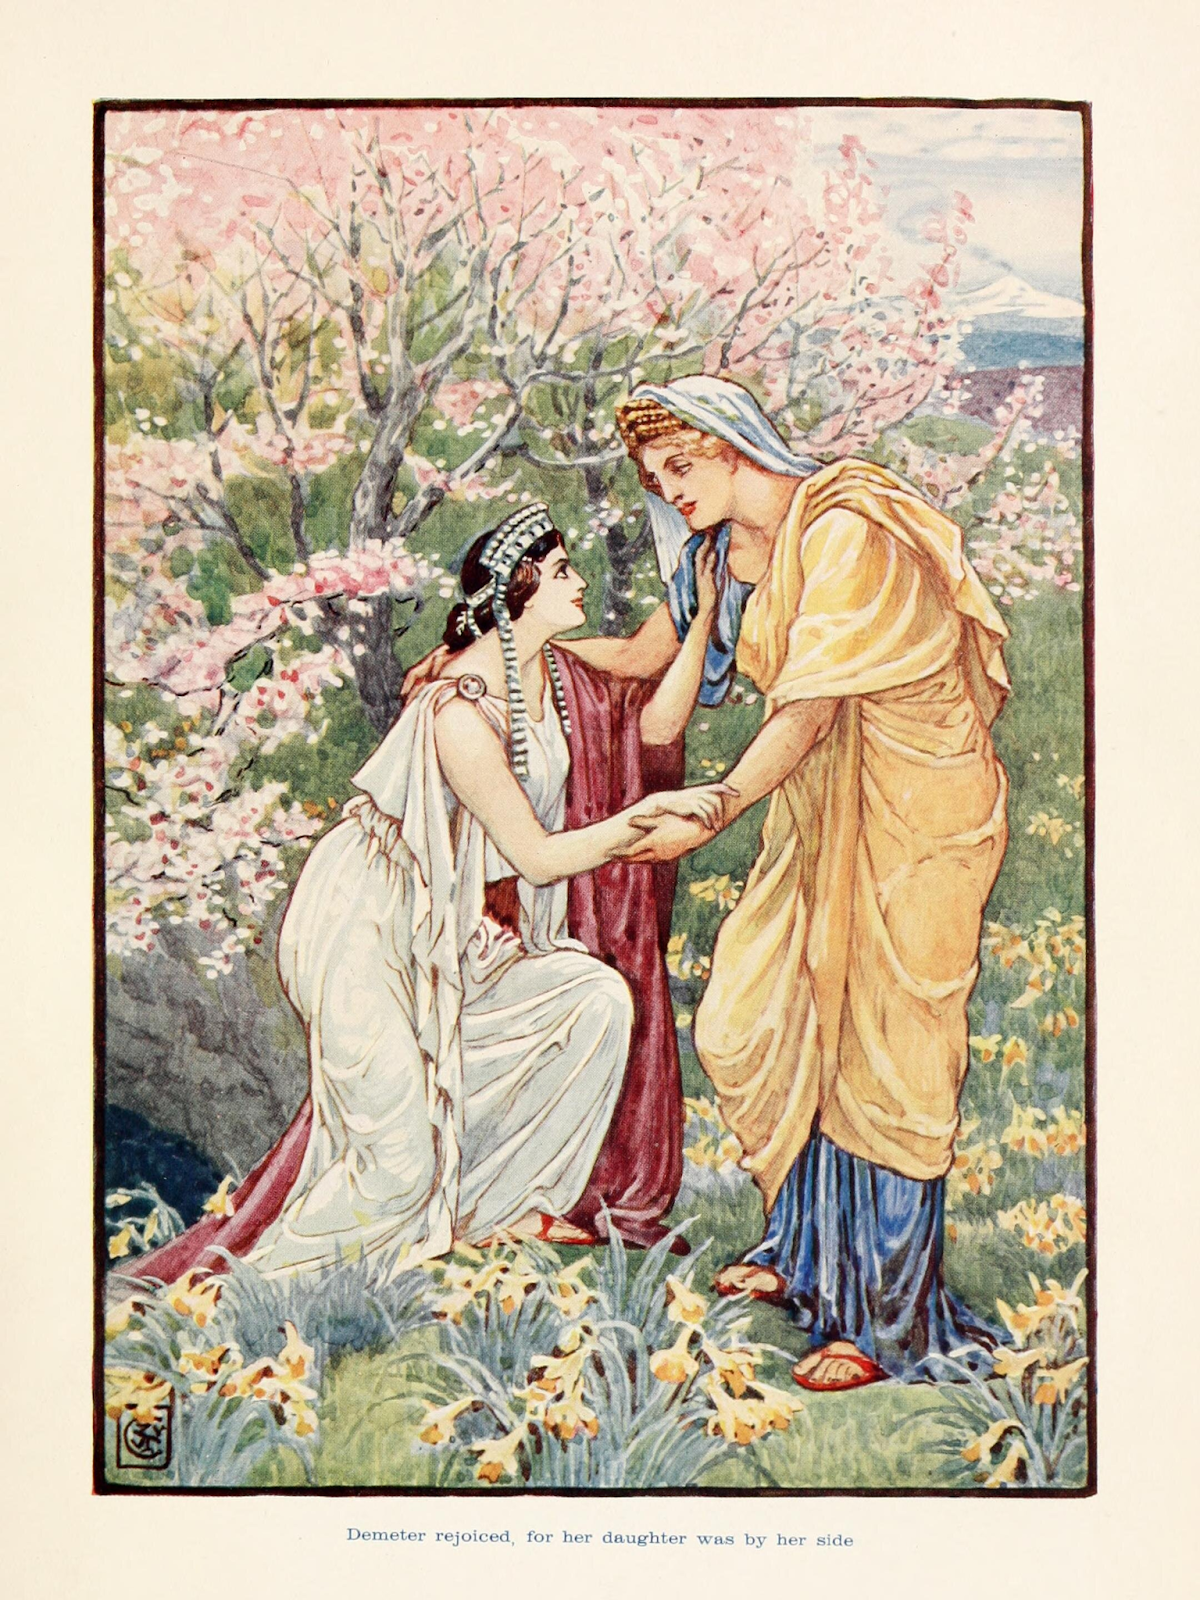 This painting, titled Demeter and Persephone by Walter Crane, depicts the reunion of Persephone and her mother, Demeter, after Persephone's kidnapping.